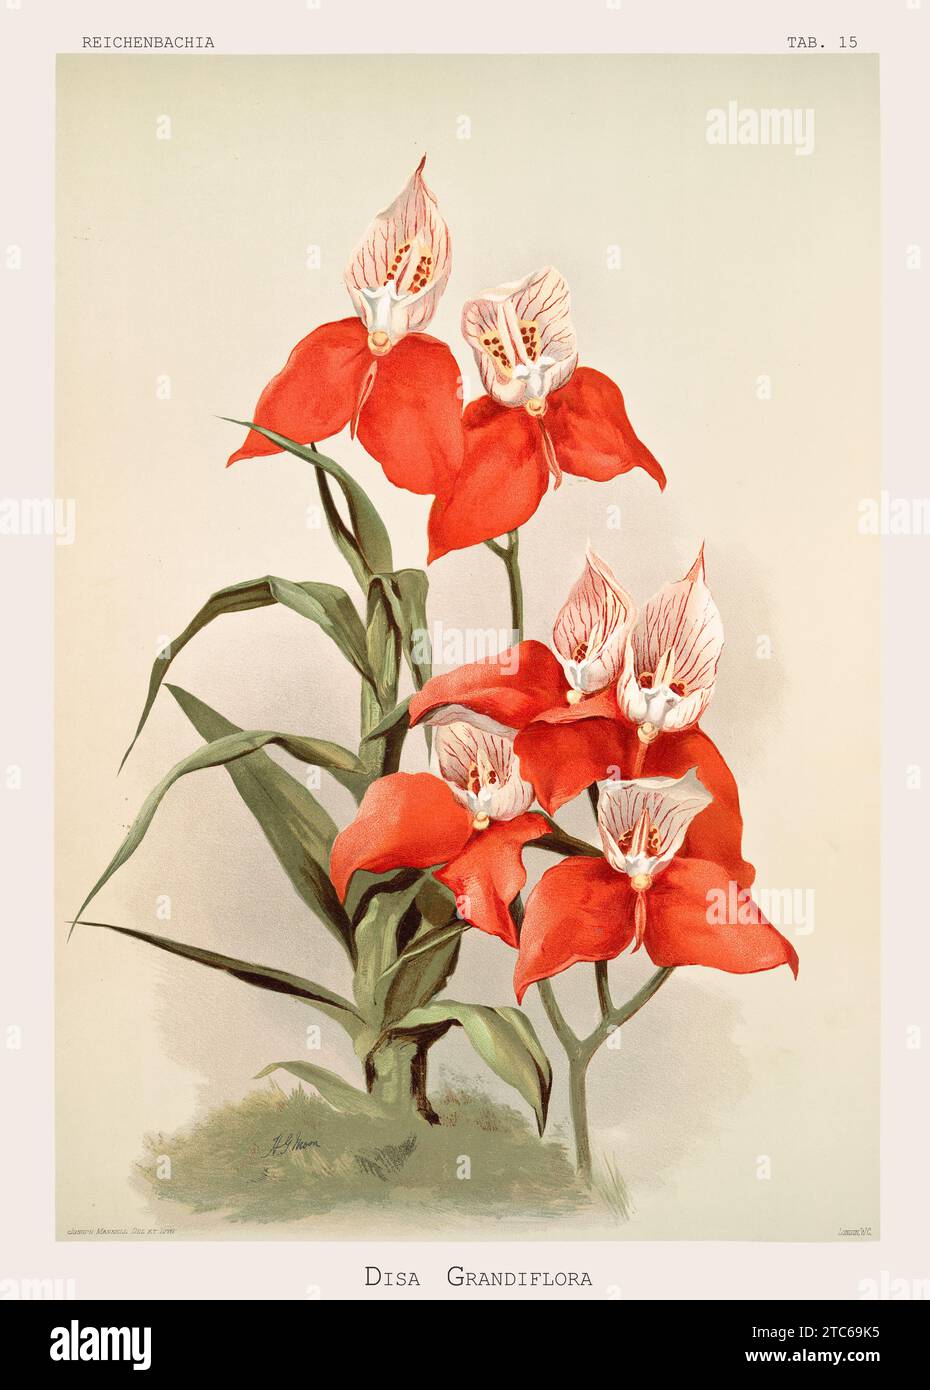 Old illustration of  Red Disa (Disa uniflora). Reichenbachia, by F. Sander. St. Albans, UK, 1888 - 1894 Stock Photo